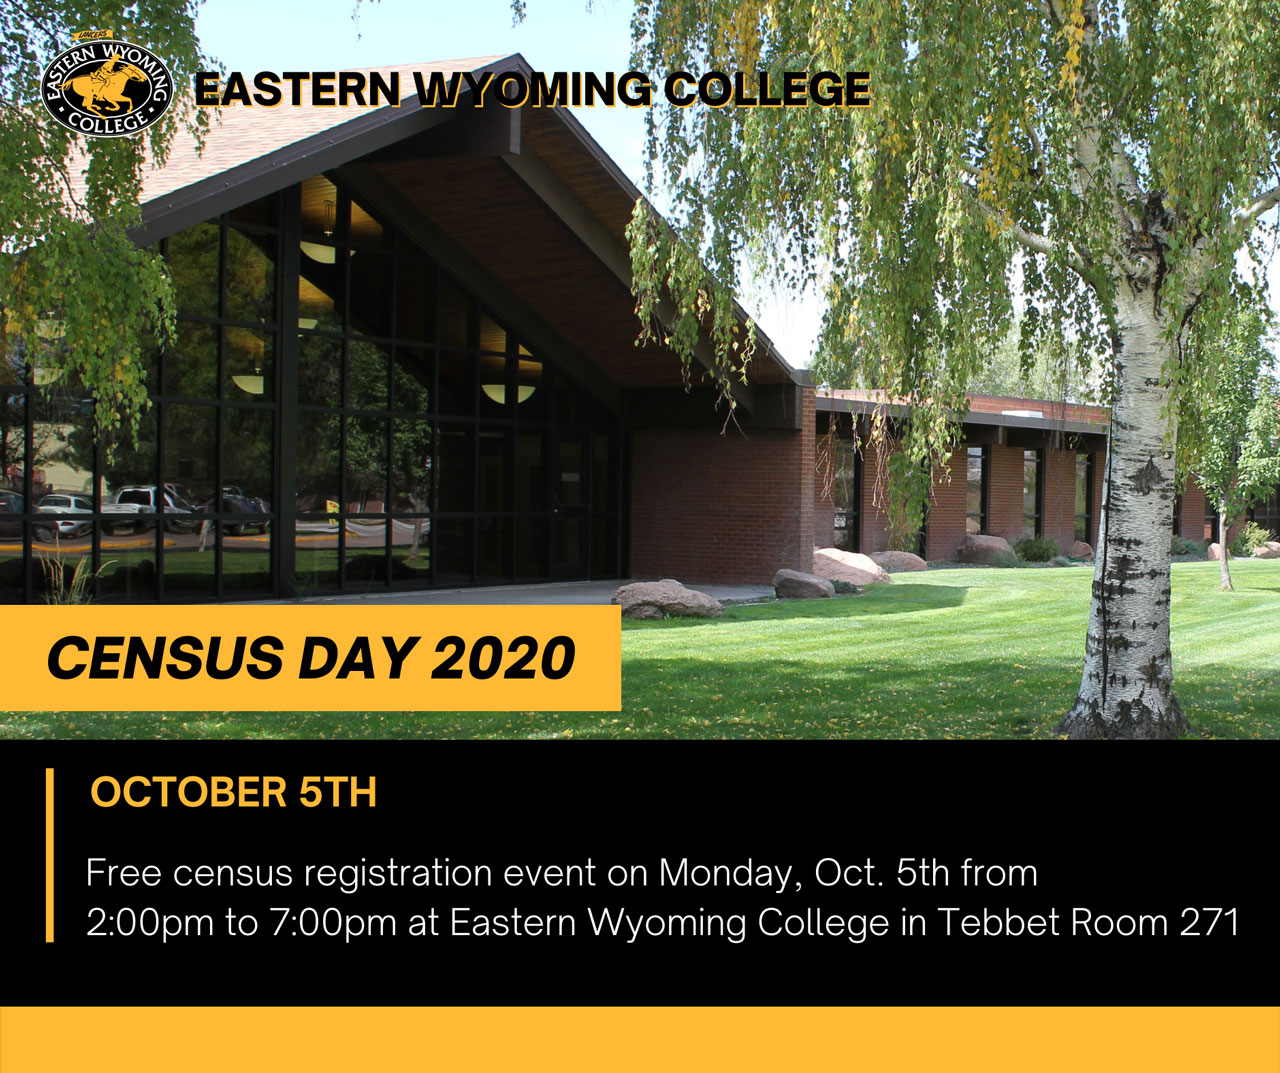 Eastern Wyoming College Census Day 2020 - October 5th - Tebbet - Room 271